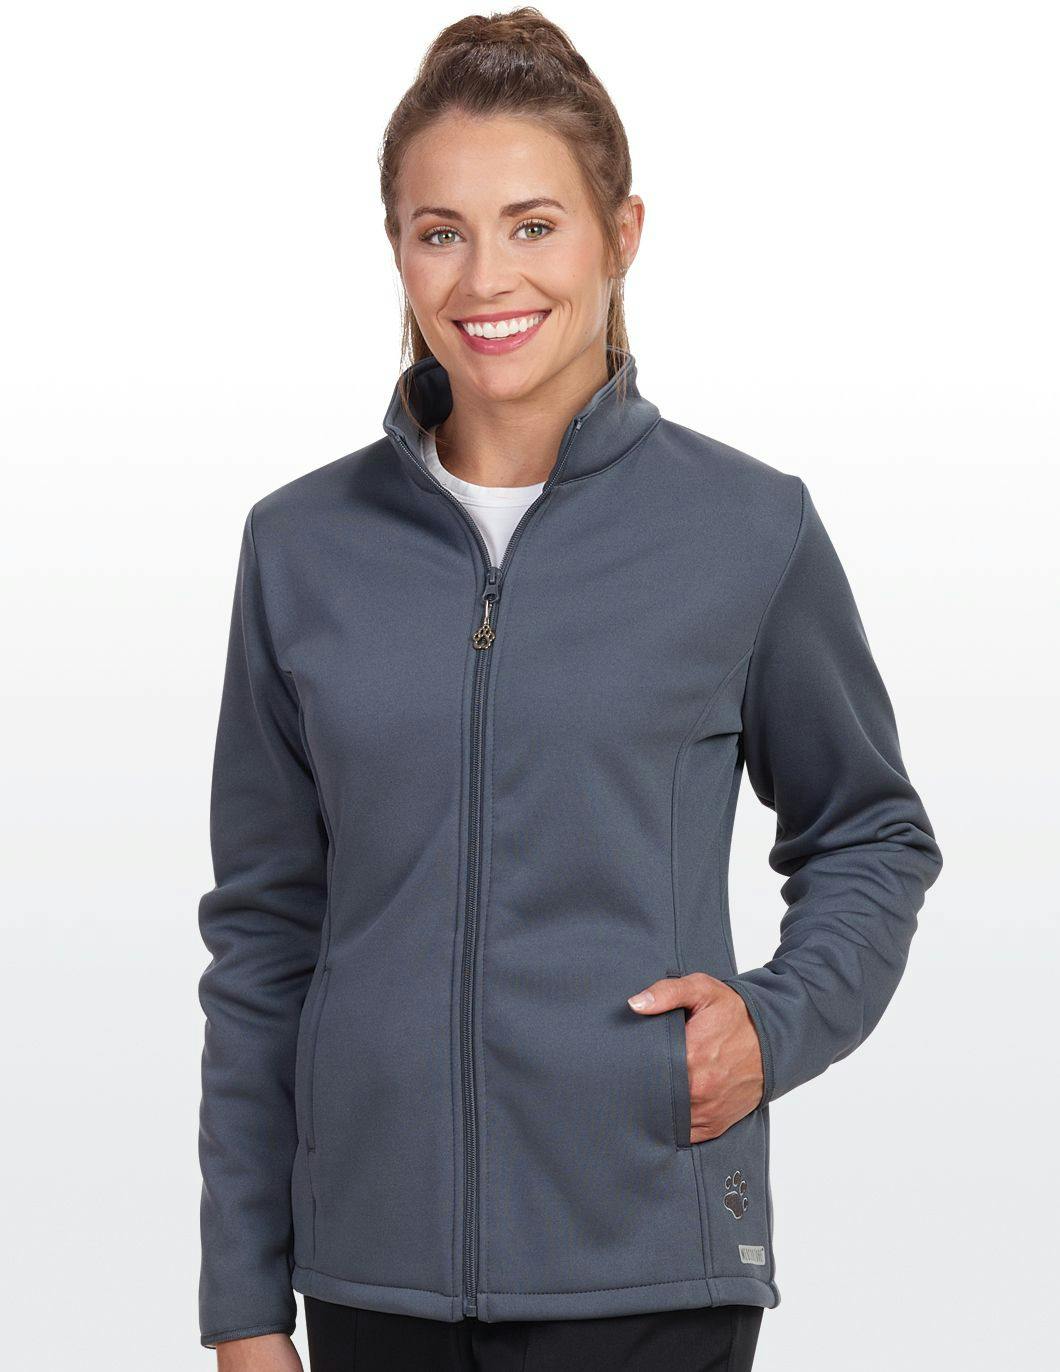 activate-womens-tech-jacket-with-free-zipper-pull-and-paw-pewter